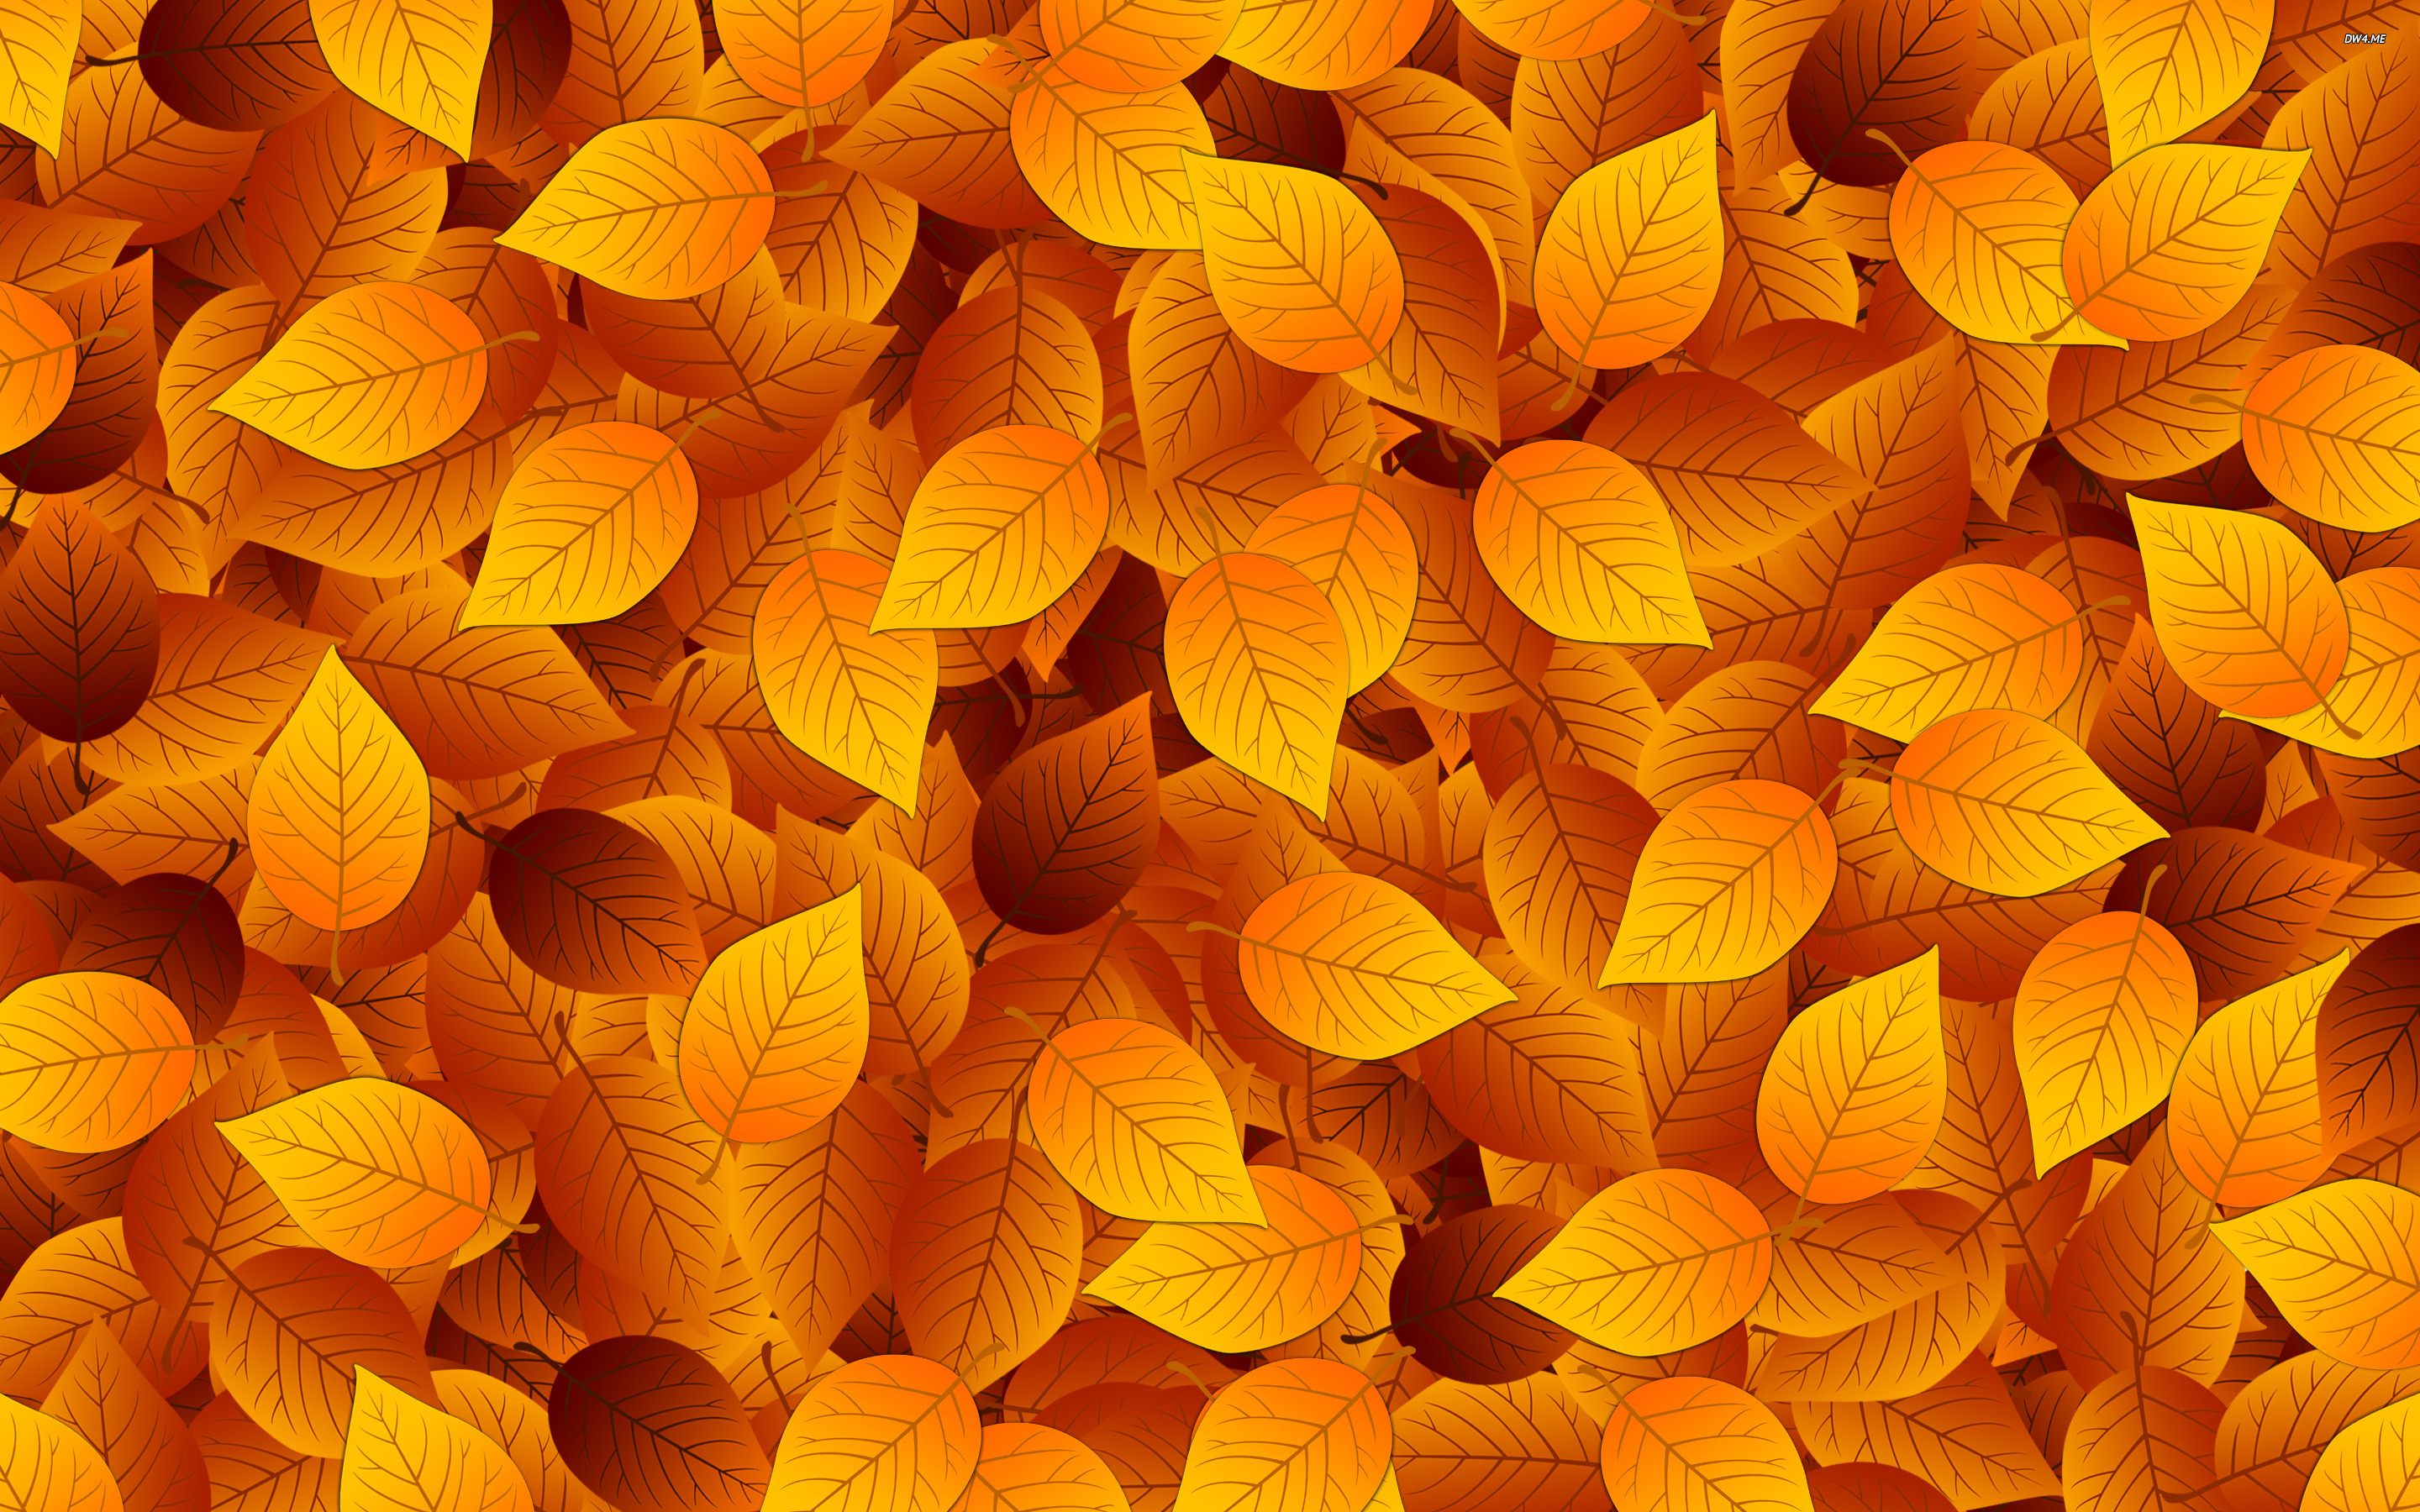 Details 100 autumn leaves background - Abzlocal.mx